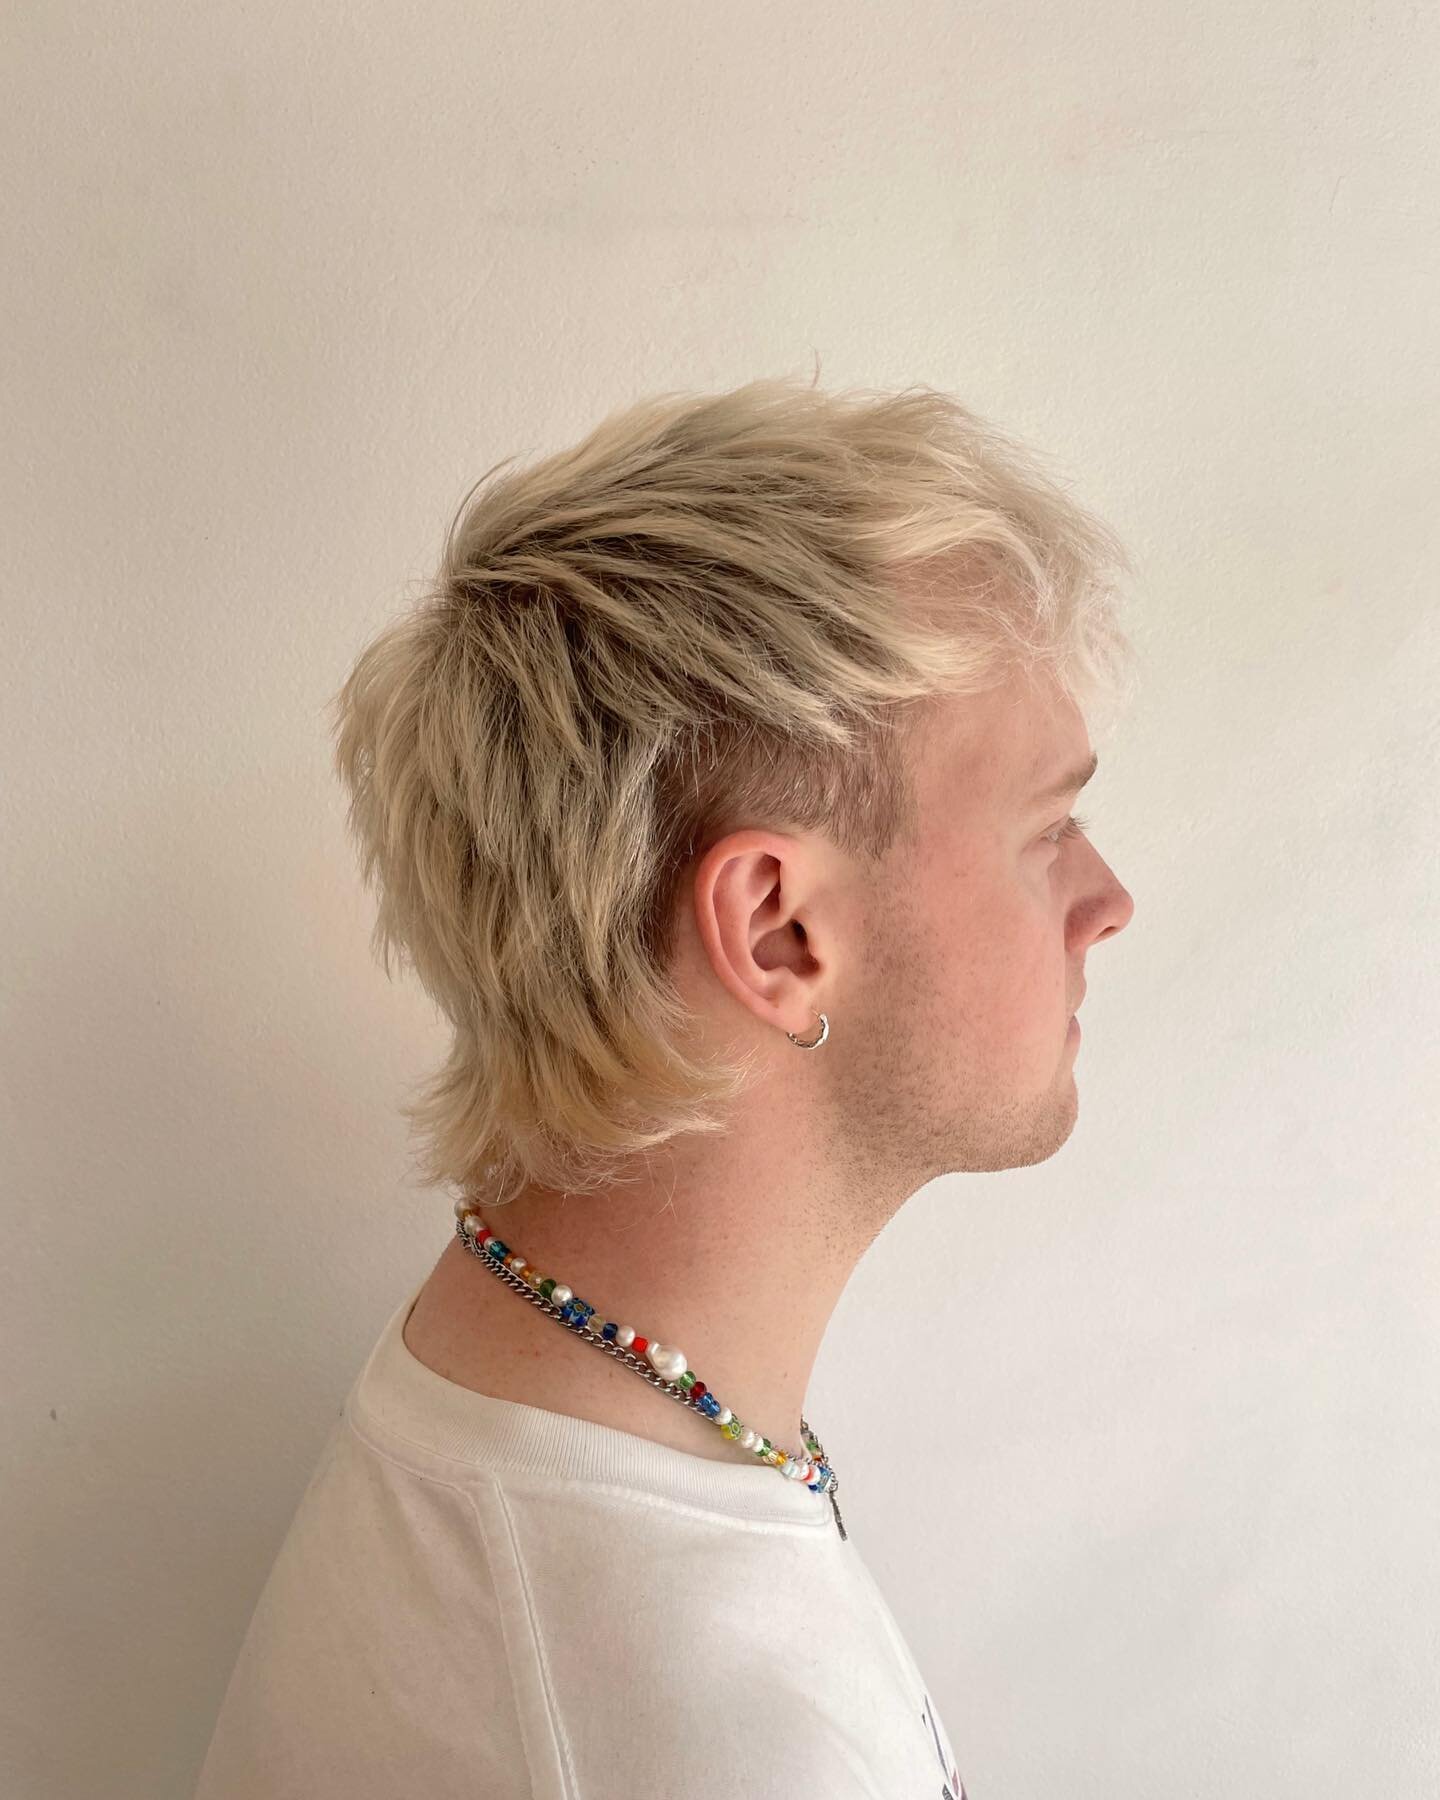 Fresh mullet for Sam!

Thanks to everyone that has come into see me at the new space :) feeling very grateful for all your ongoing support 🥰

#mullet #newtownhairdresser